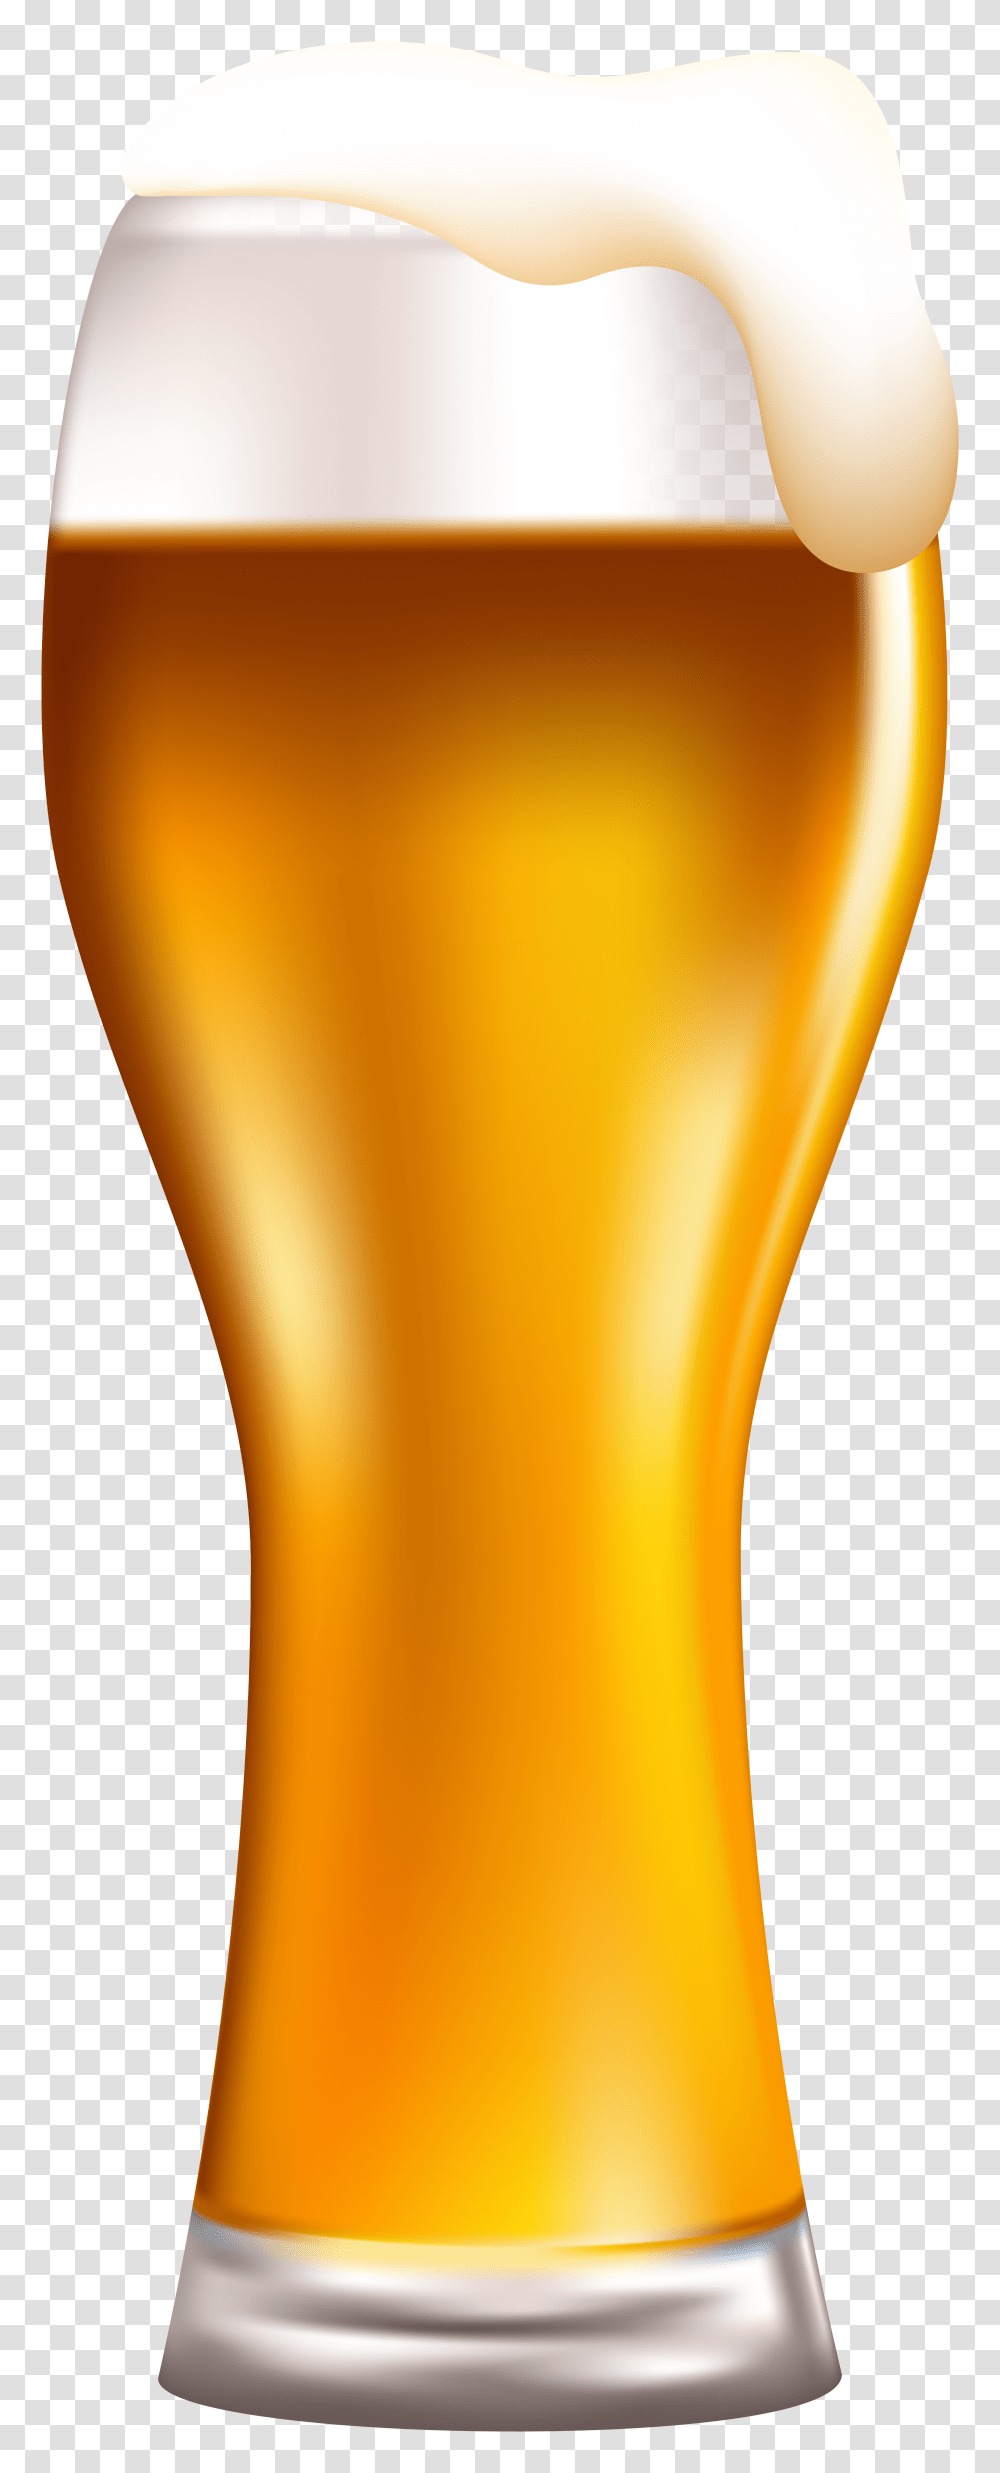 Glass With Beer Foam Clip Art, Beer Glass, Alcohol, Beverage, Drink Transparent Png